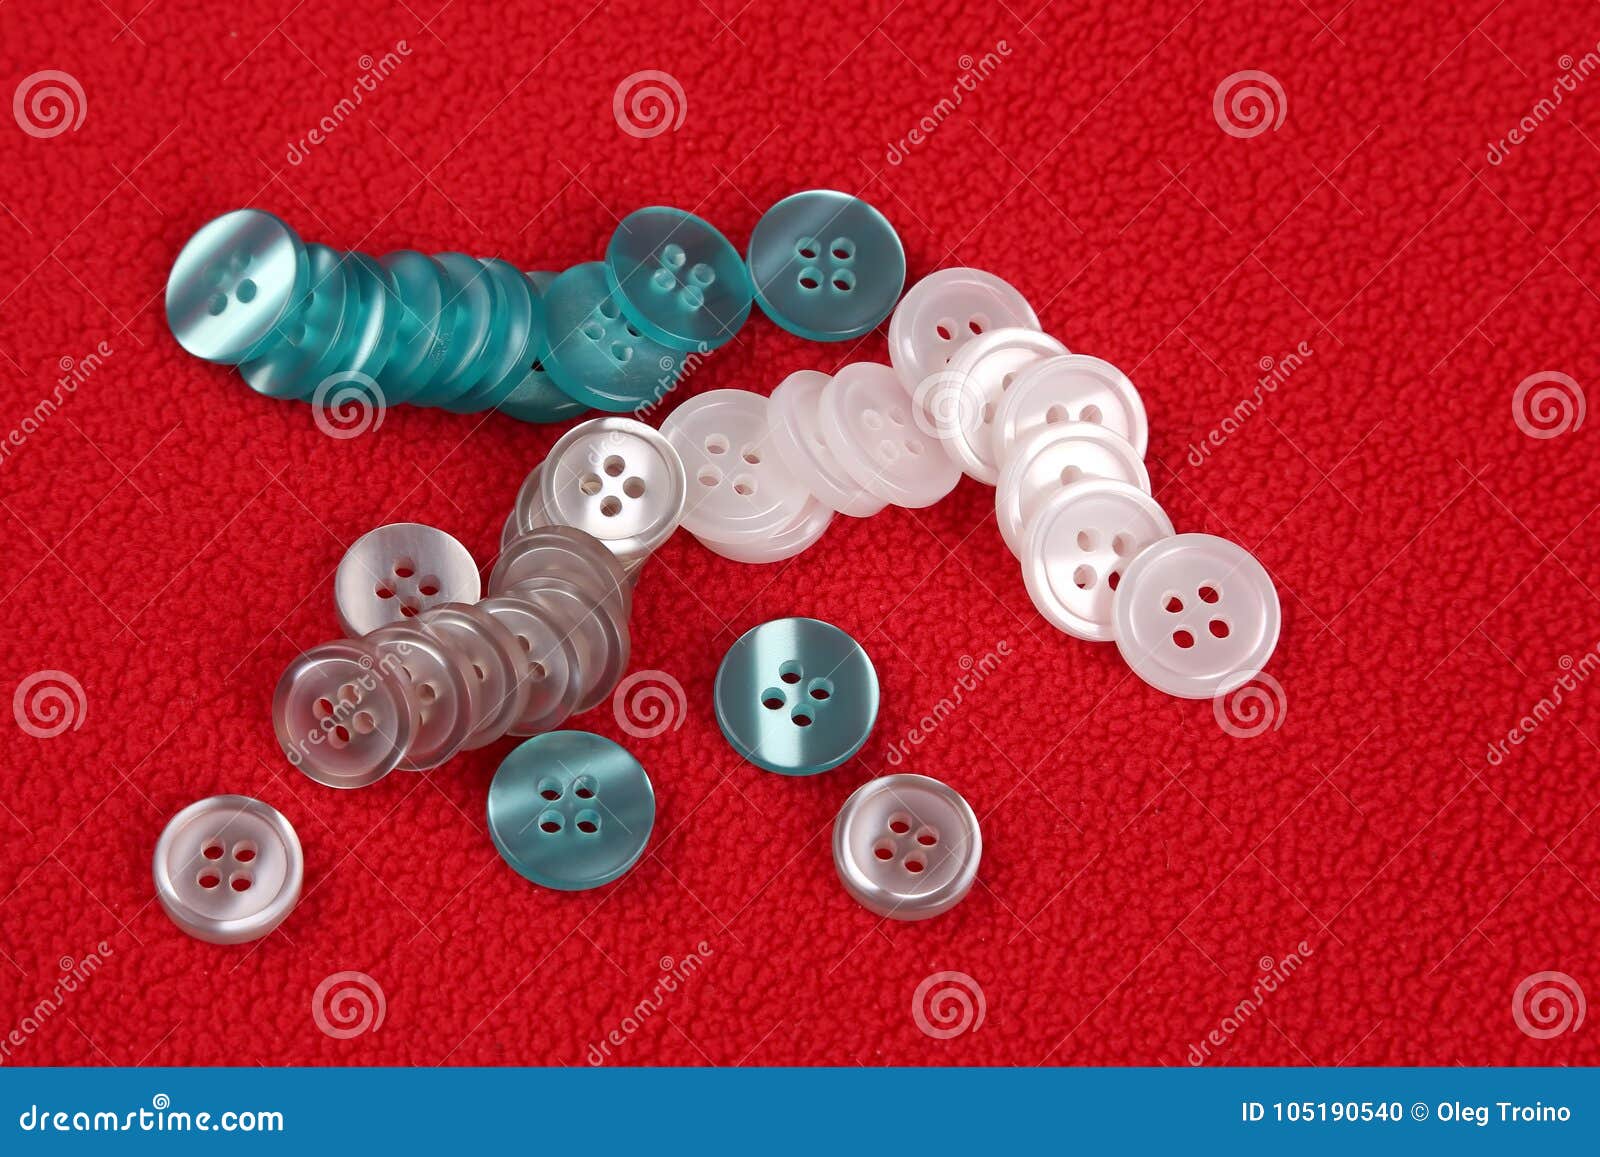 Red mother-of-pearl buttons